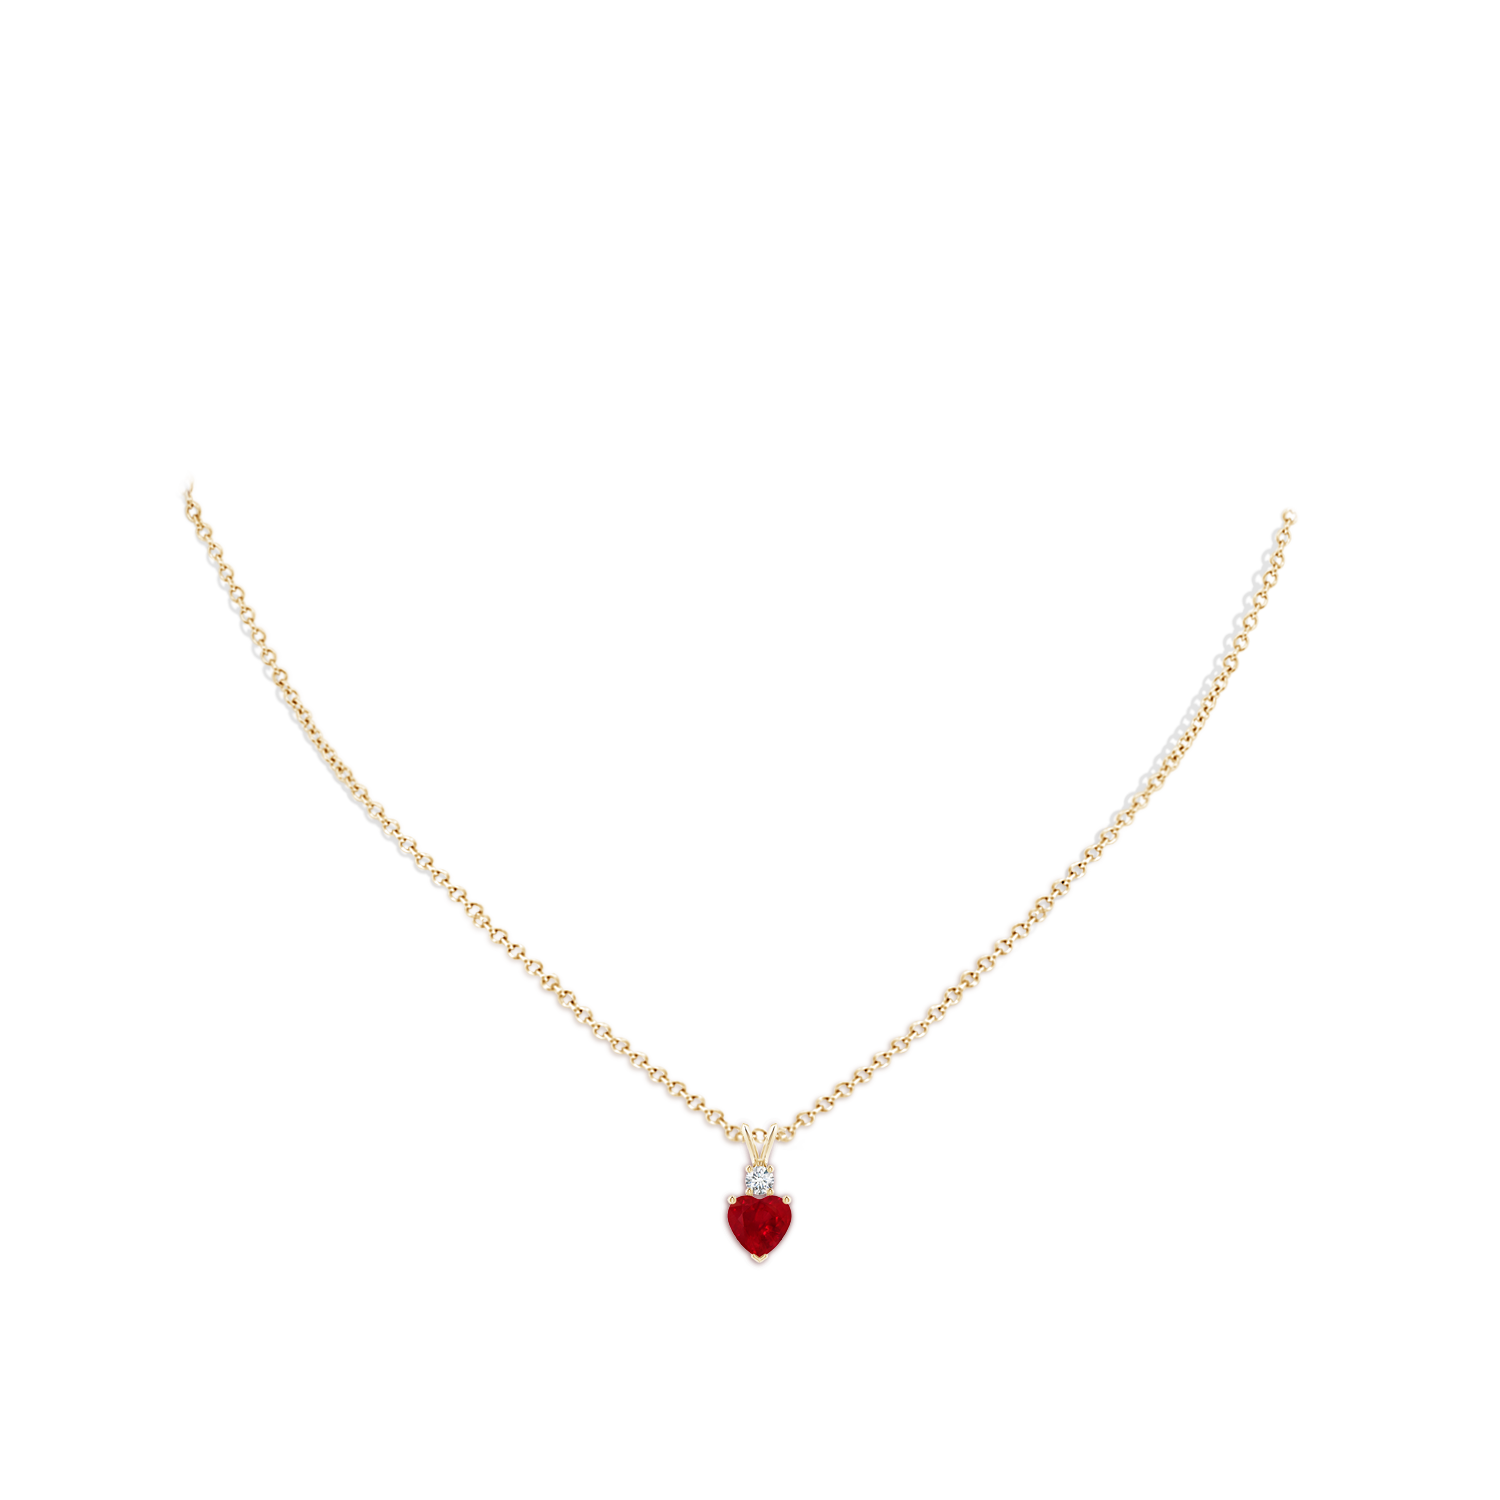 AAA - Ruby / 0.88 CT / 14 KT Yellow Gold